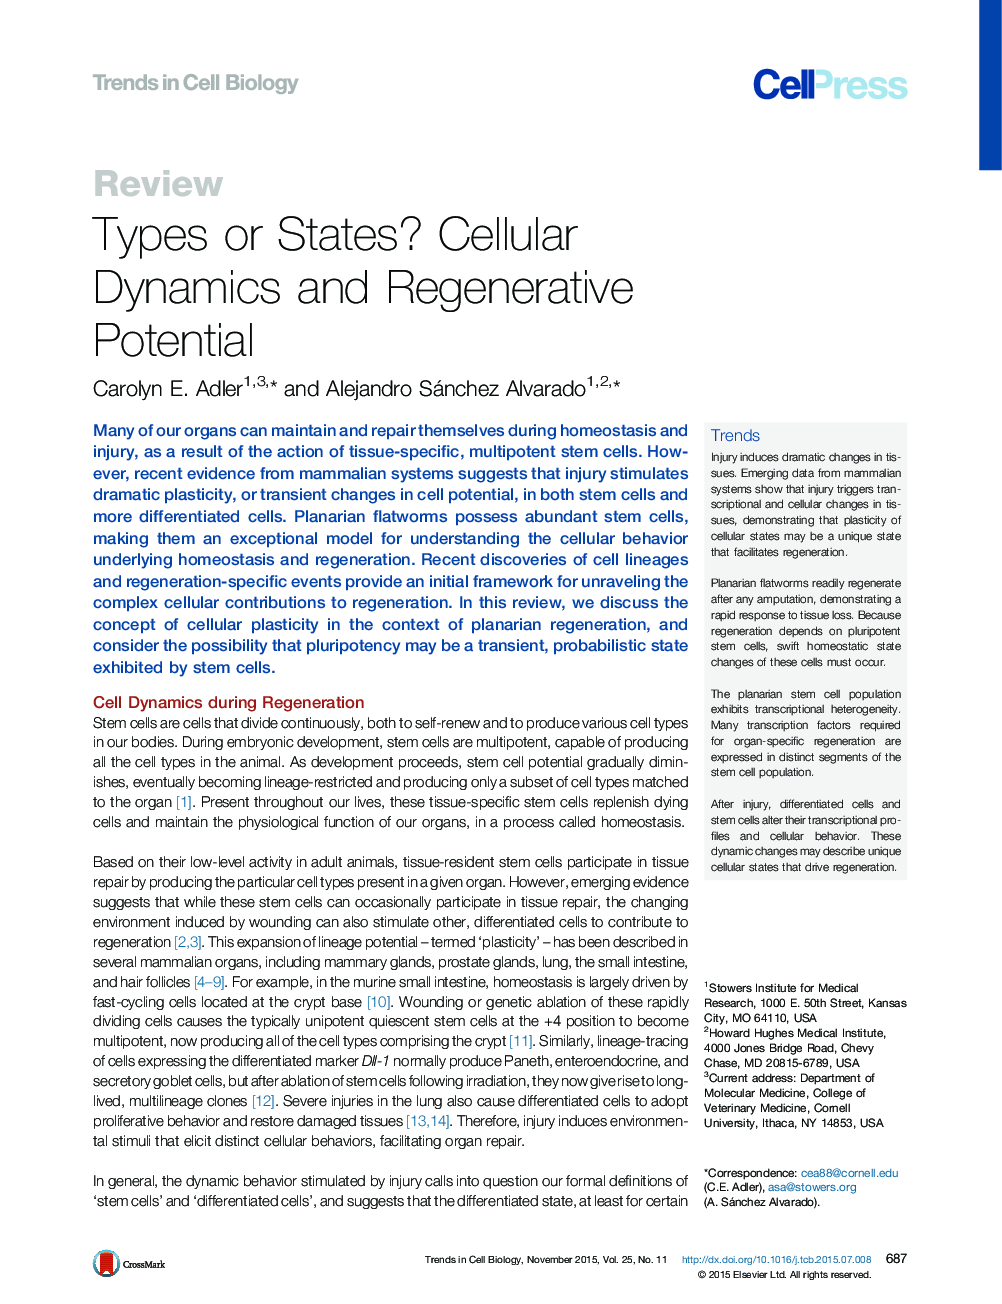 Types or States? Cellular Dynamics and Regenerative Potential